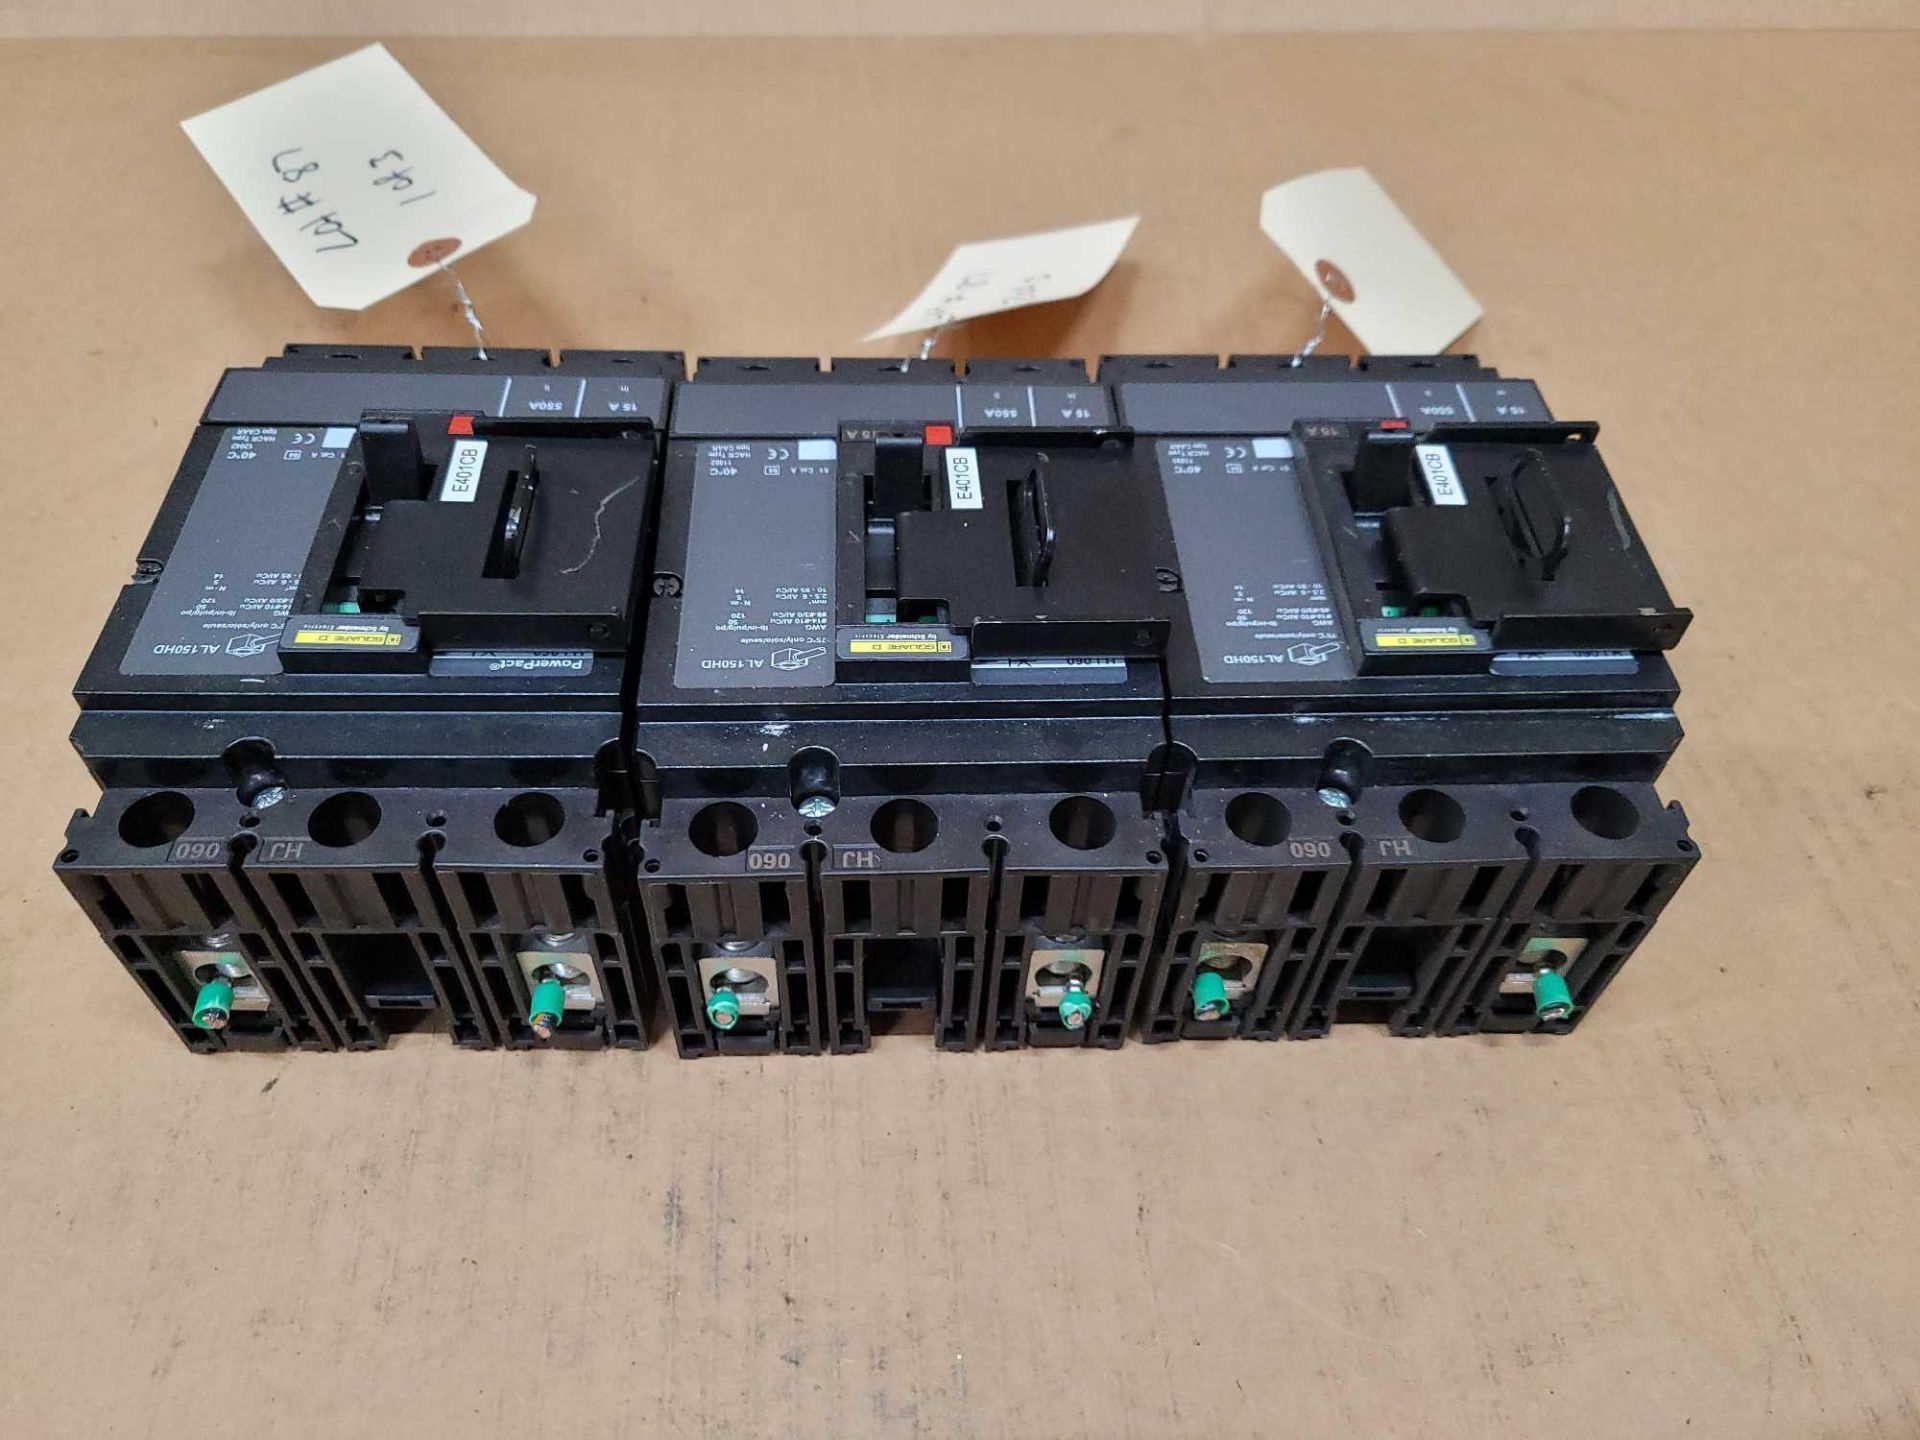 LOT OF 3 SQUARE D HJL26015 15 AMP CIRCUIT BREAKER - Image 2 of 3